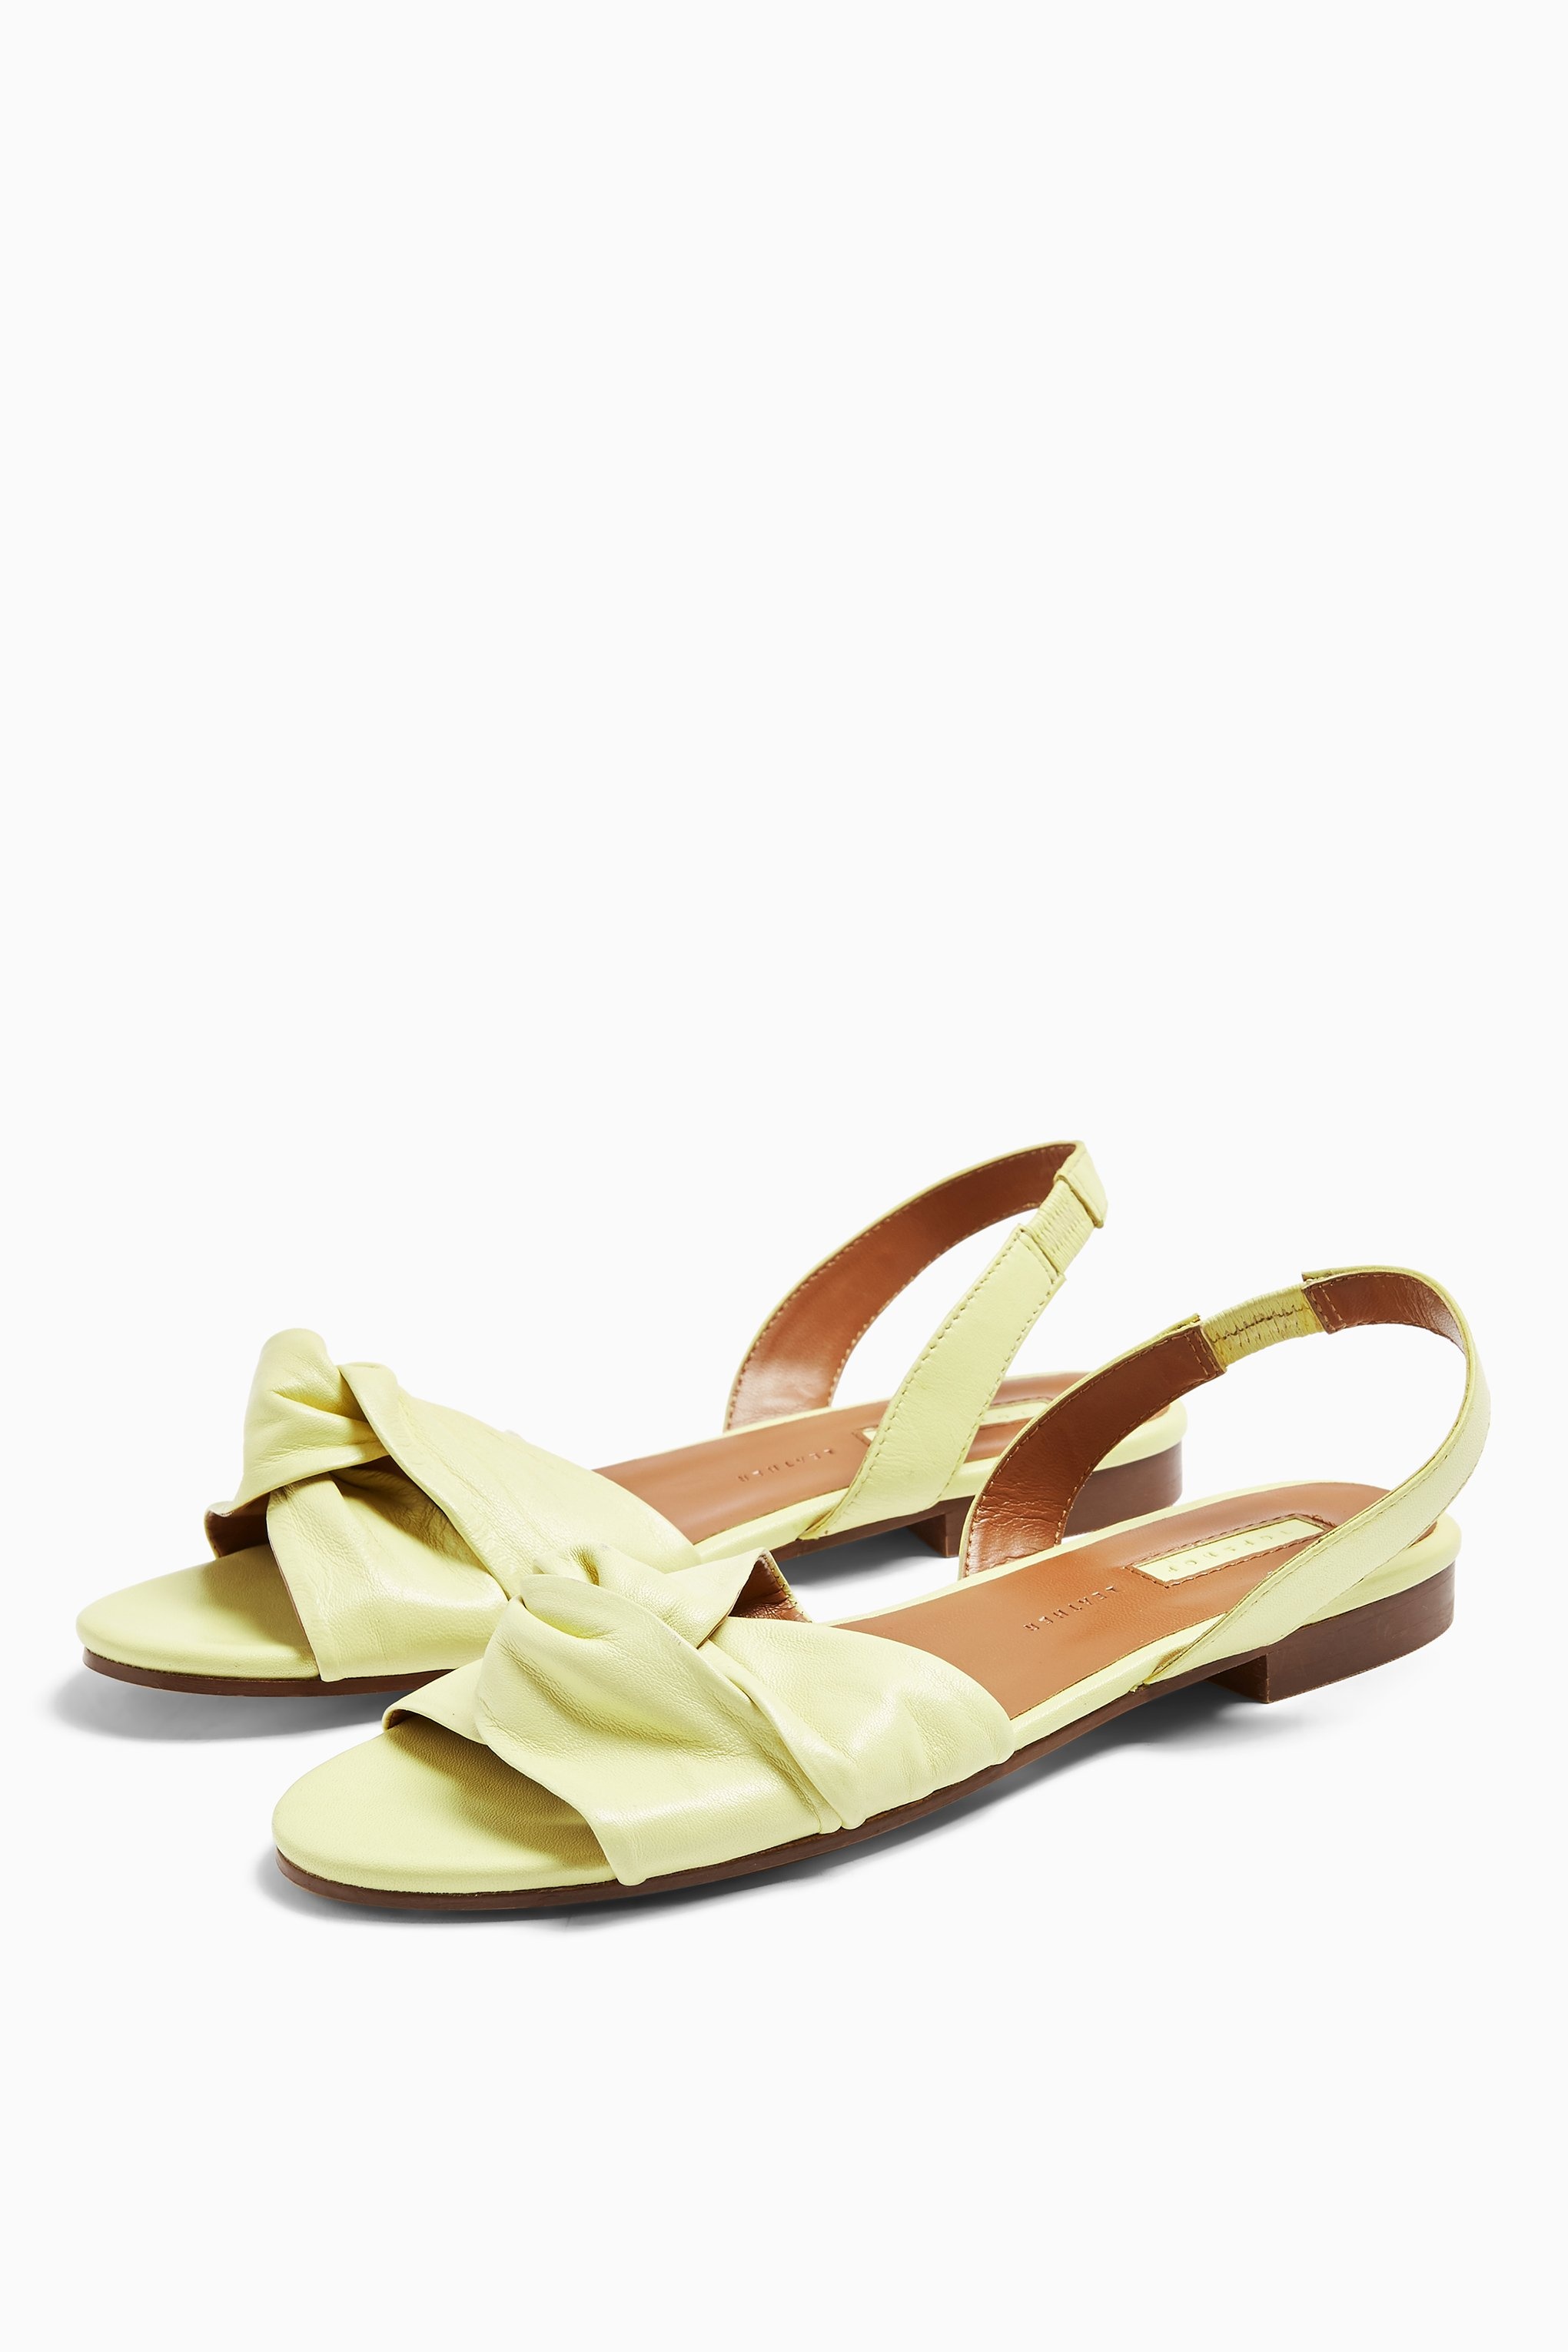 Topshop's Expensive-Looking Sandals Are a Summer Favourite | Who What Wear